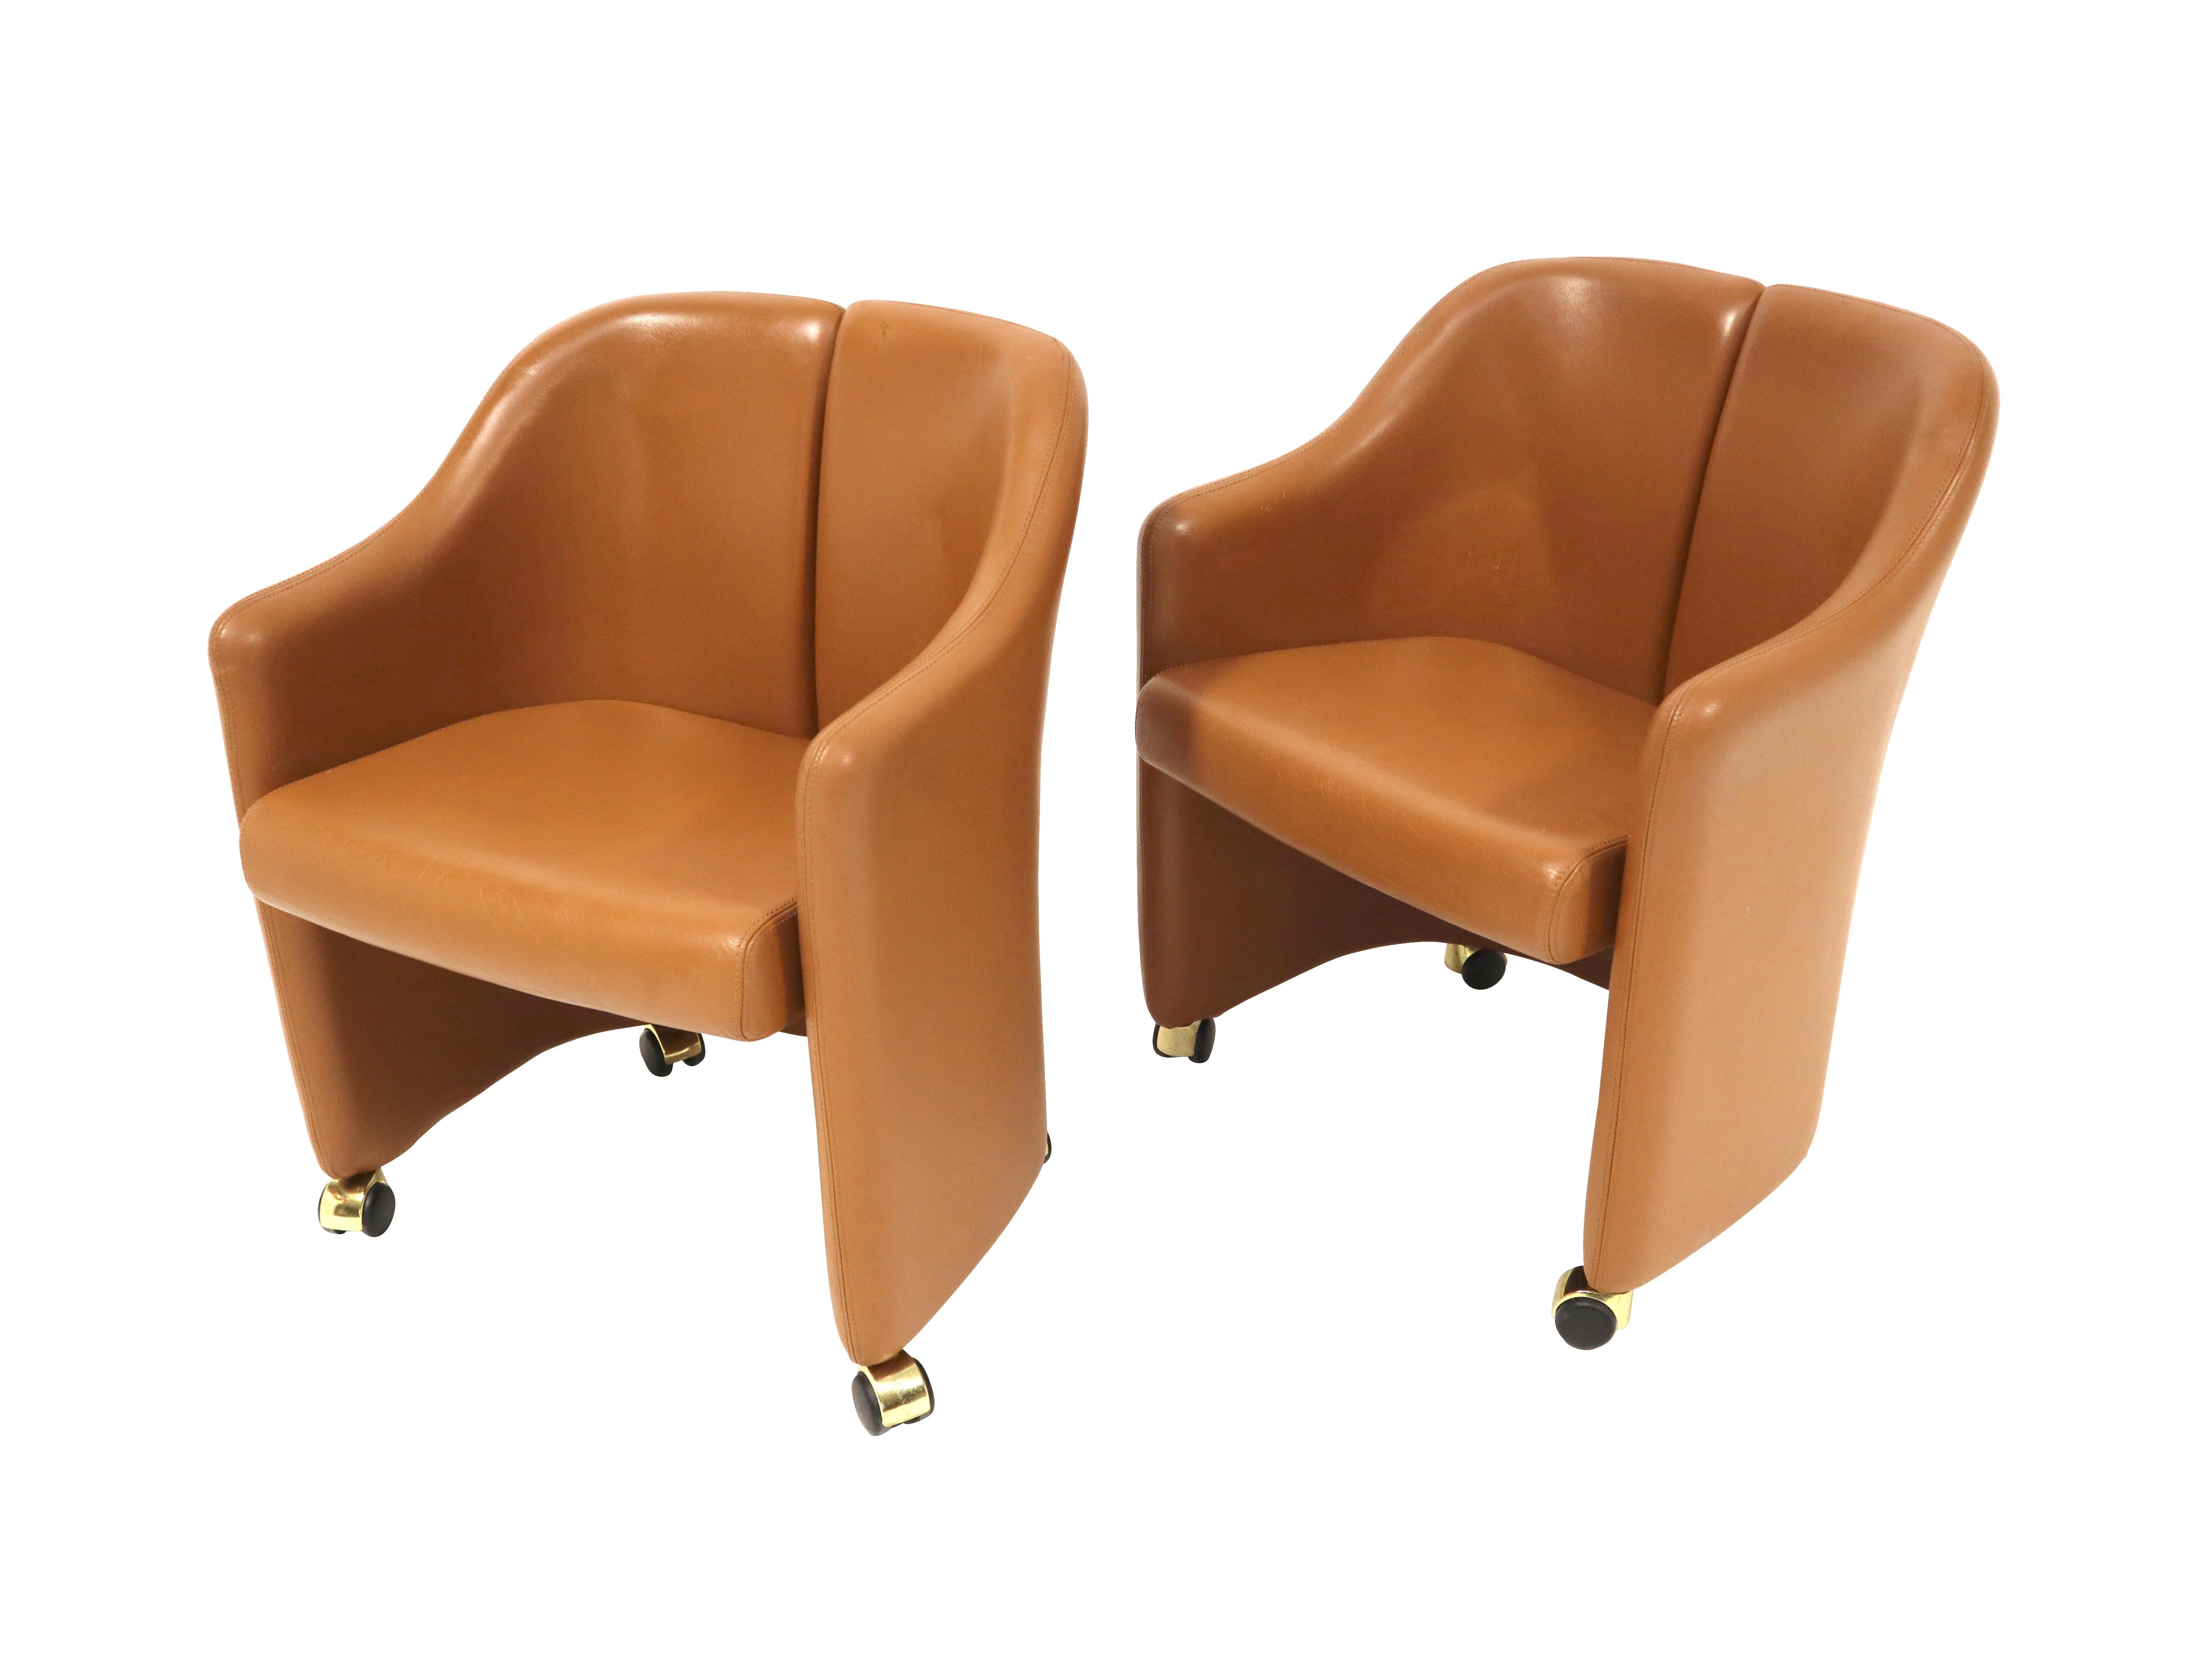 Set of 10 Eugenio Gerli for Tecno leather dining chairs.  These are the taller “Series 142- Executive model”, which are the more rare dining height chairs from this line.  Original camel color leather is in excellent condition. Brass caped wheels